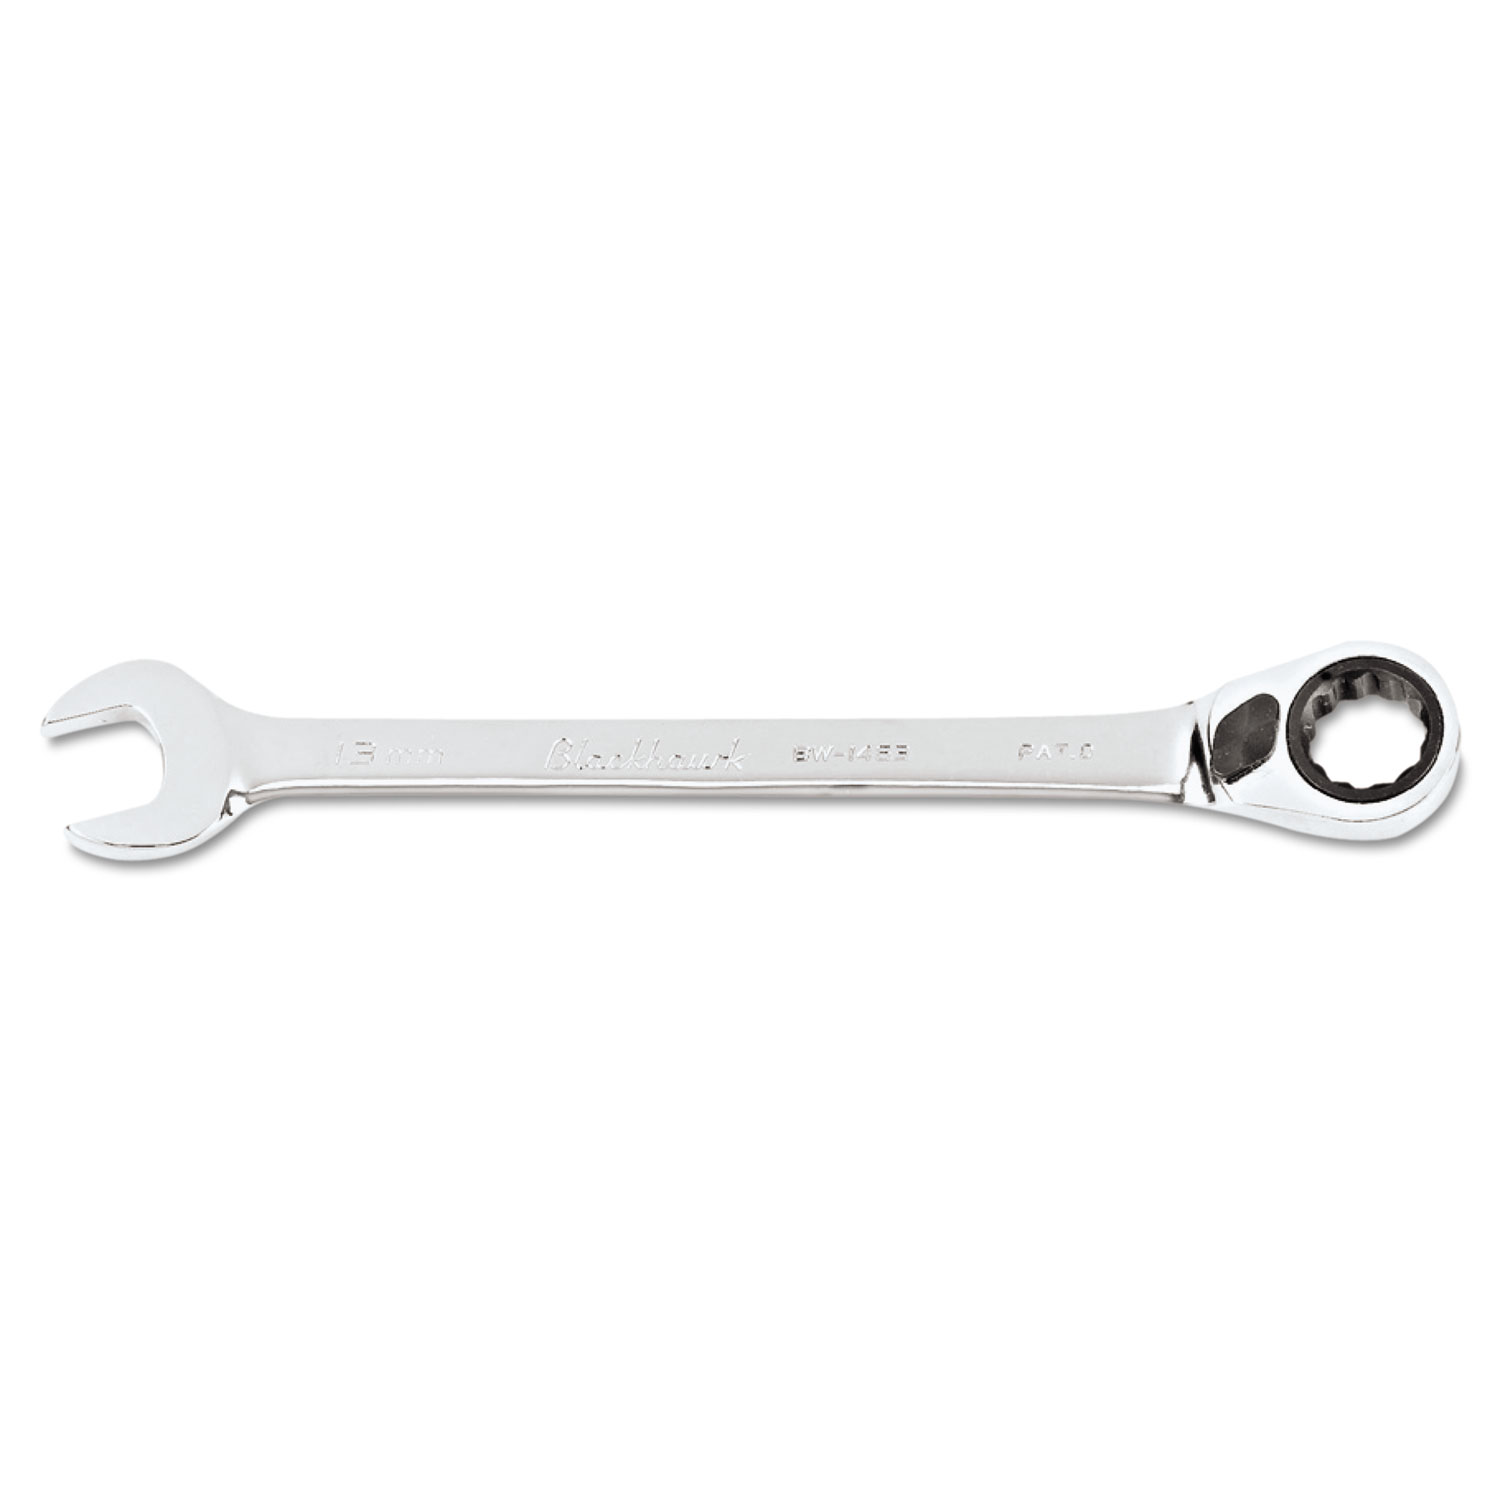 Reversible Ratcheting Box Wrench, 7/16 Opening